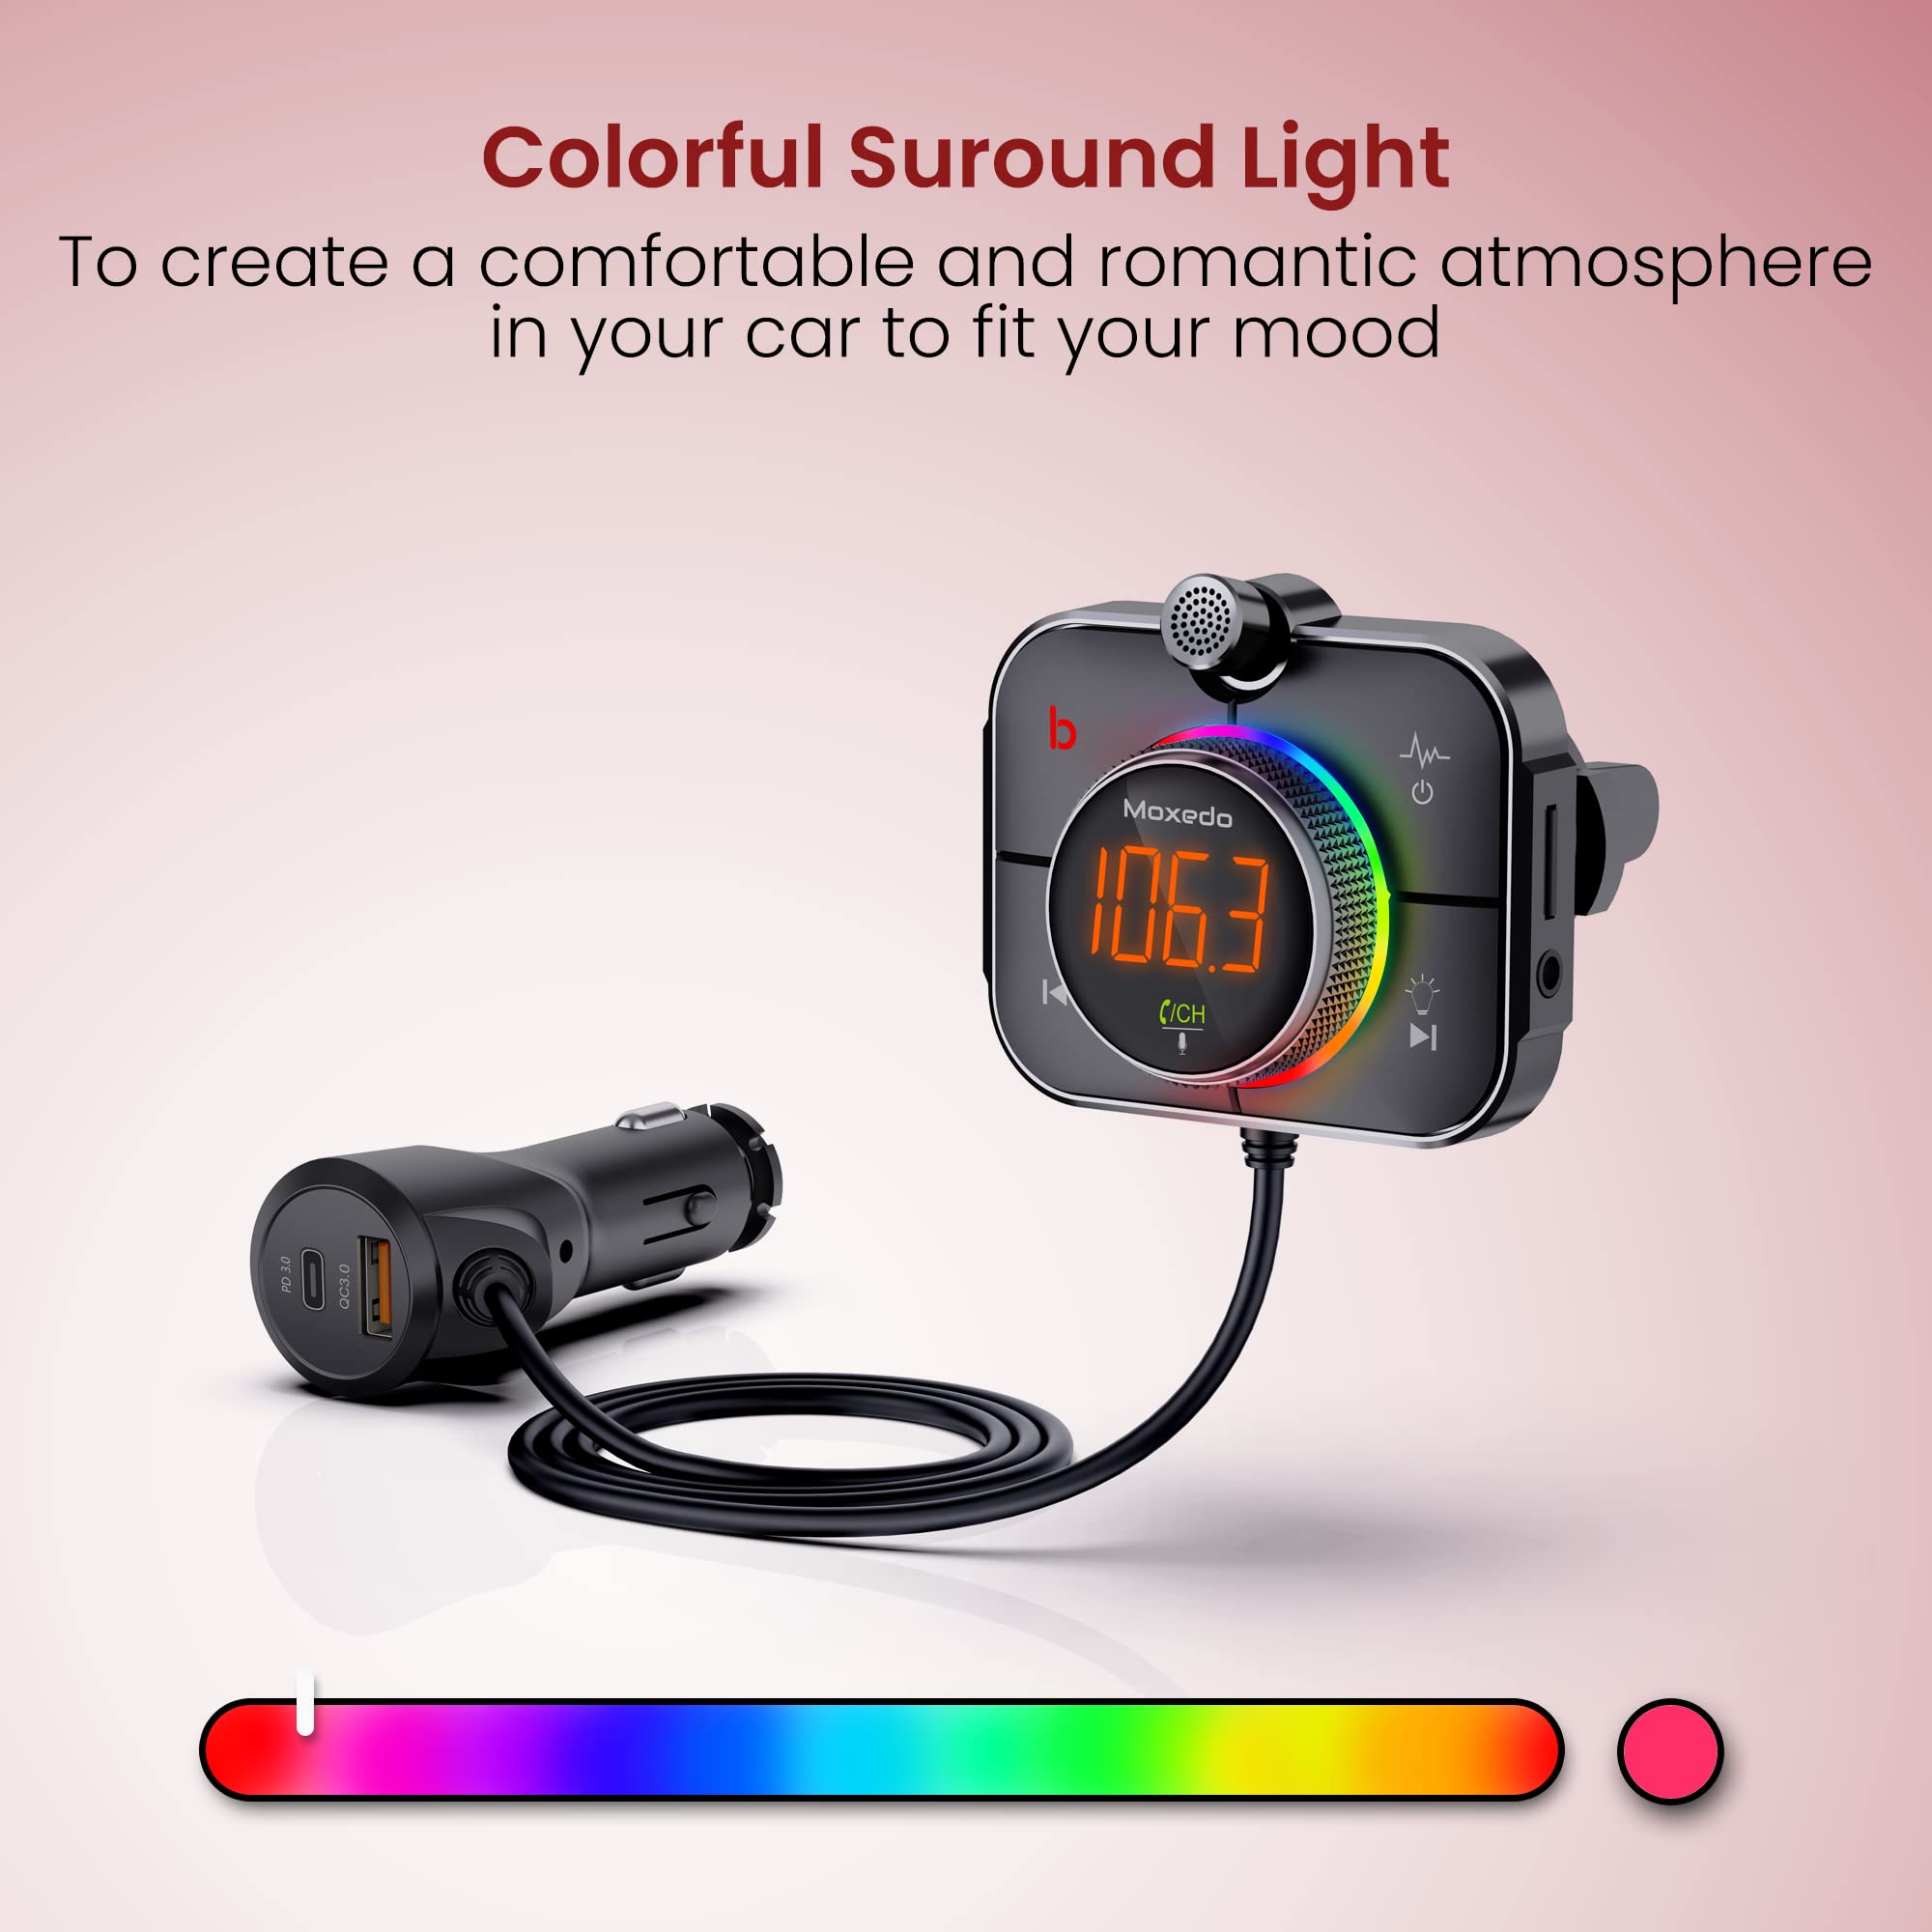 Moxedo Car FM Transmitter Wireless Bluetooth PD3.0 & QC 3.0 38W Dual Ports USB-A/USB TYPE-C Car Charger Hands-Free Call, Noise Cancellation, Bass Booster, 7 RGB Colors Support SD Card AUX Input